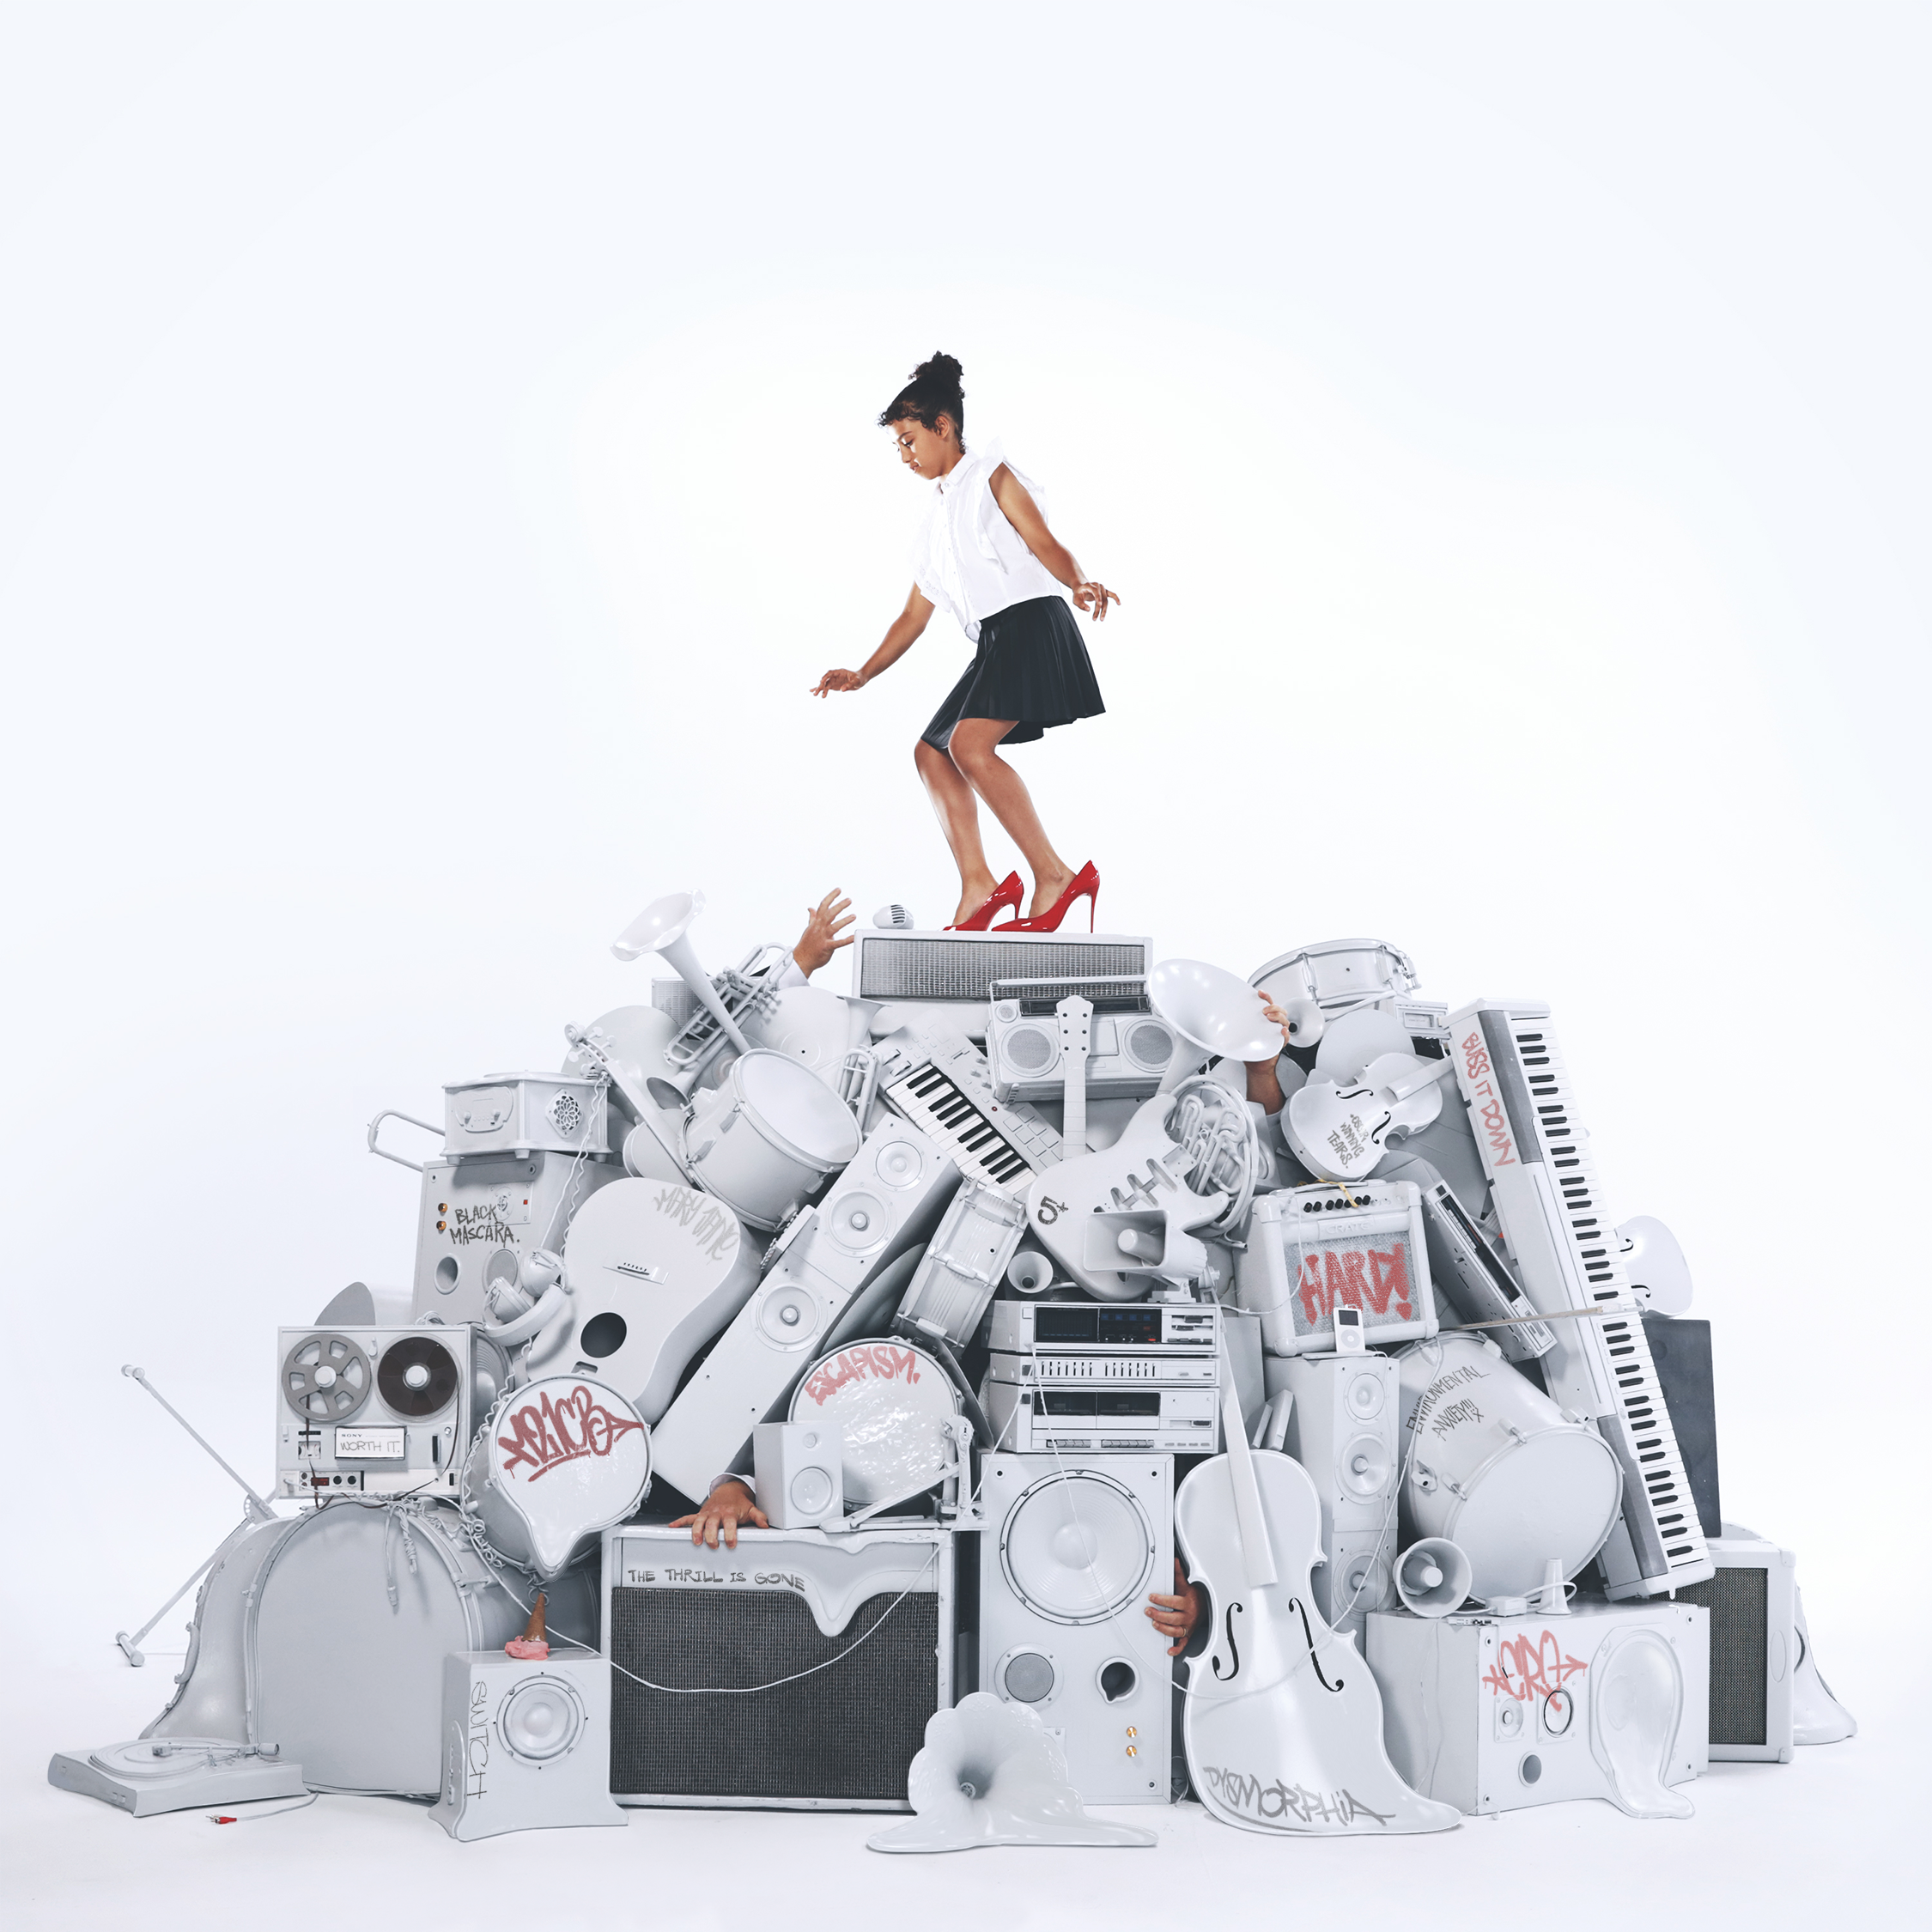 Small girl on pile of white instruments